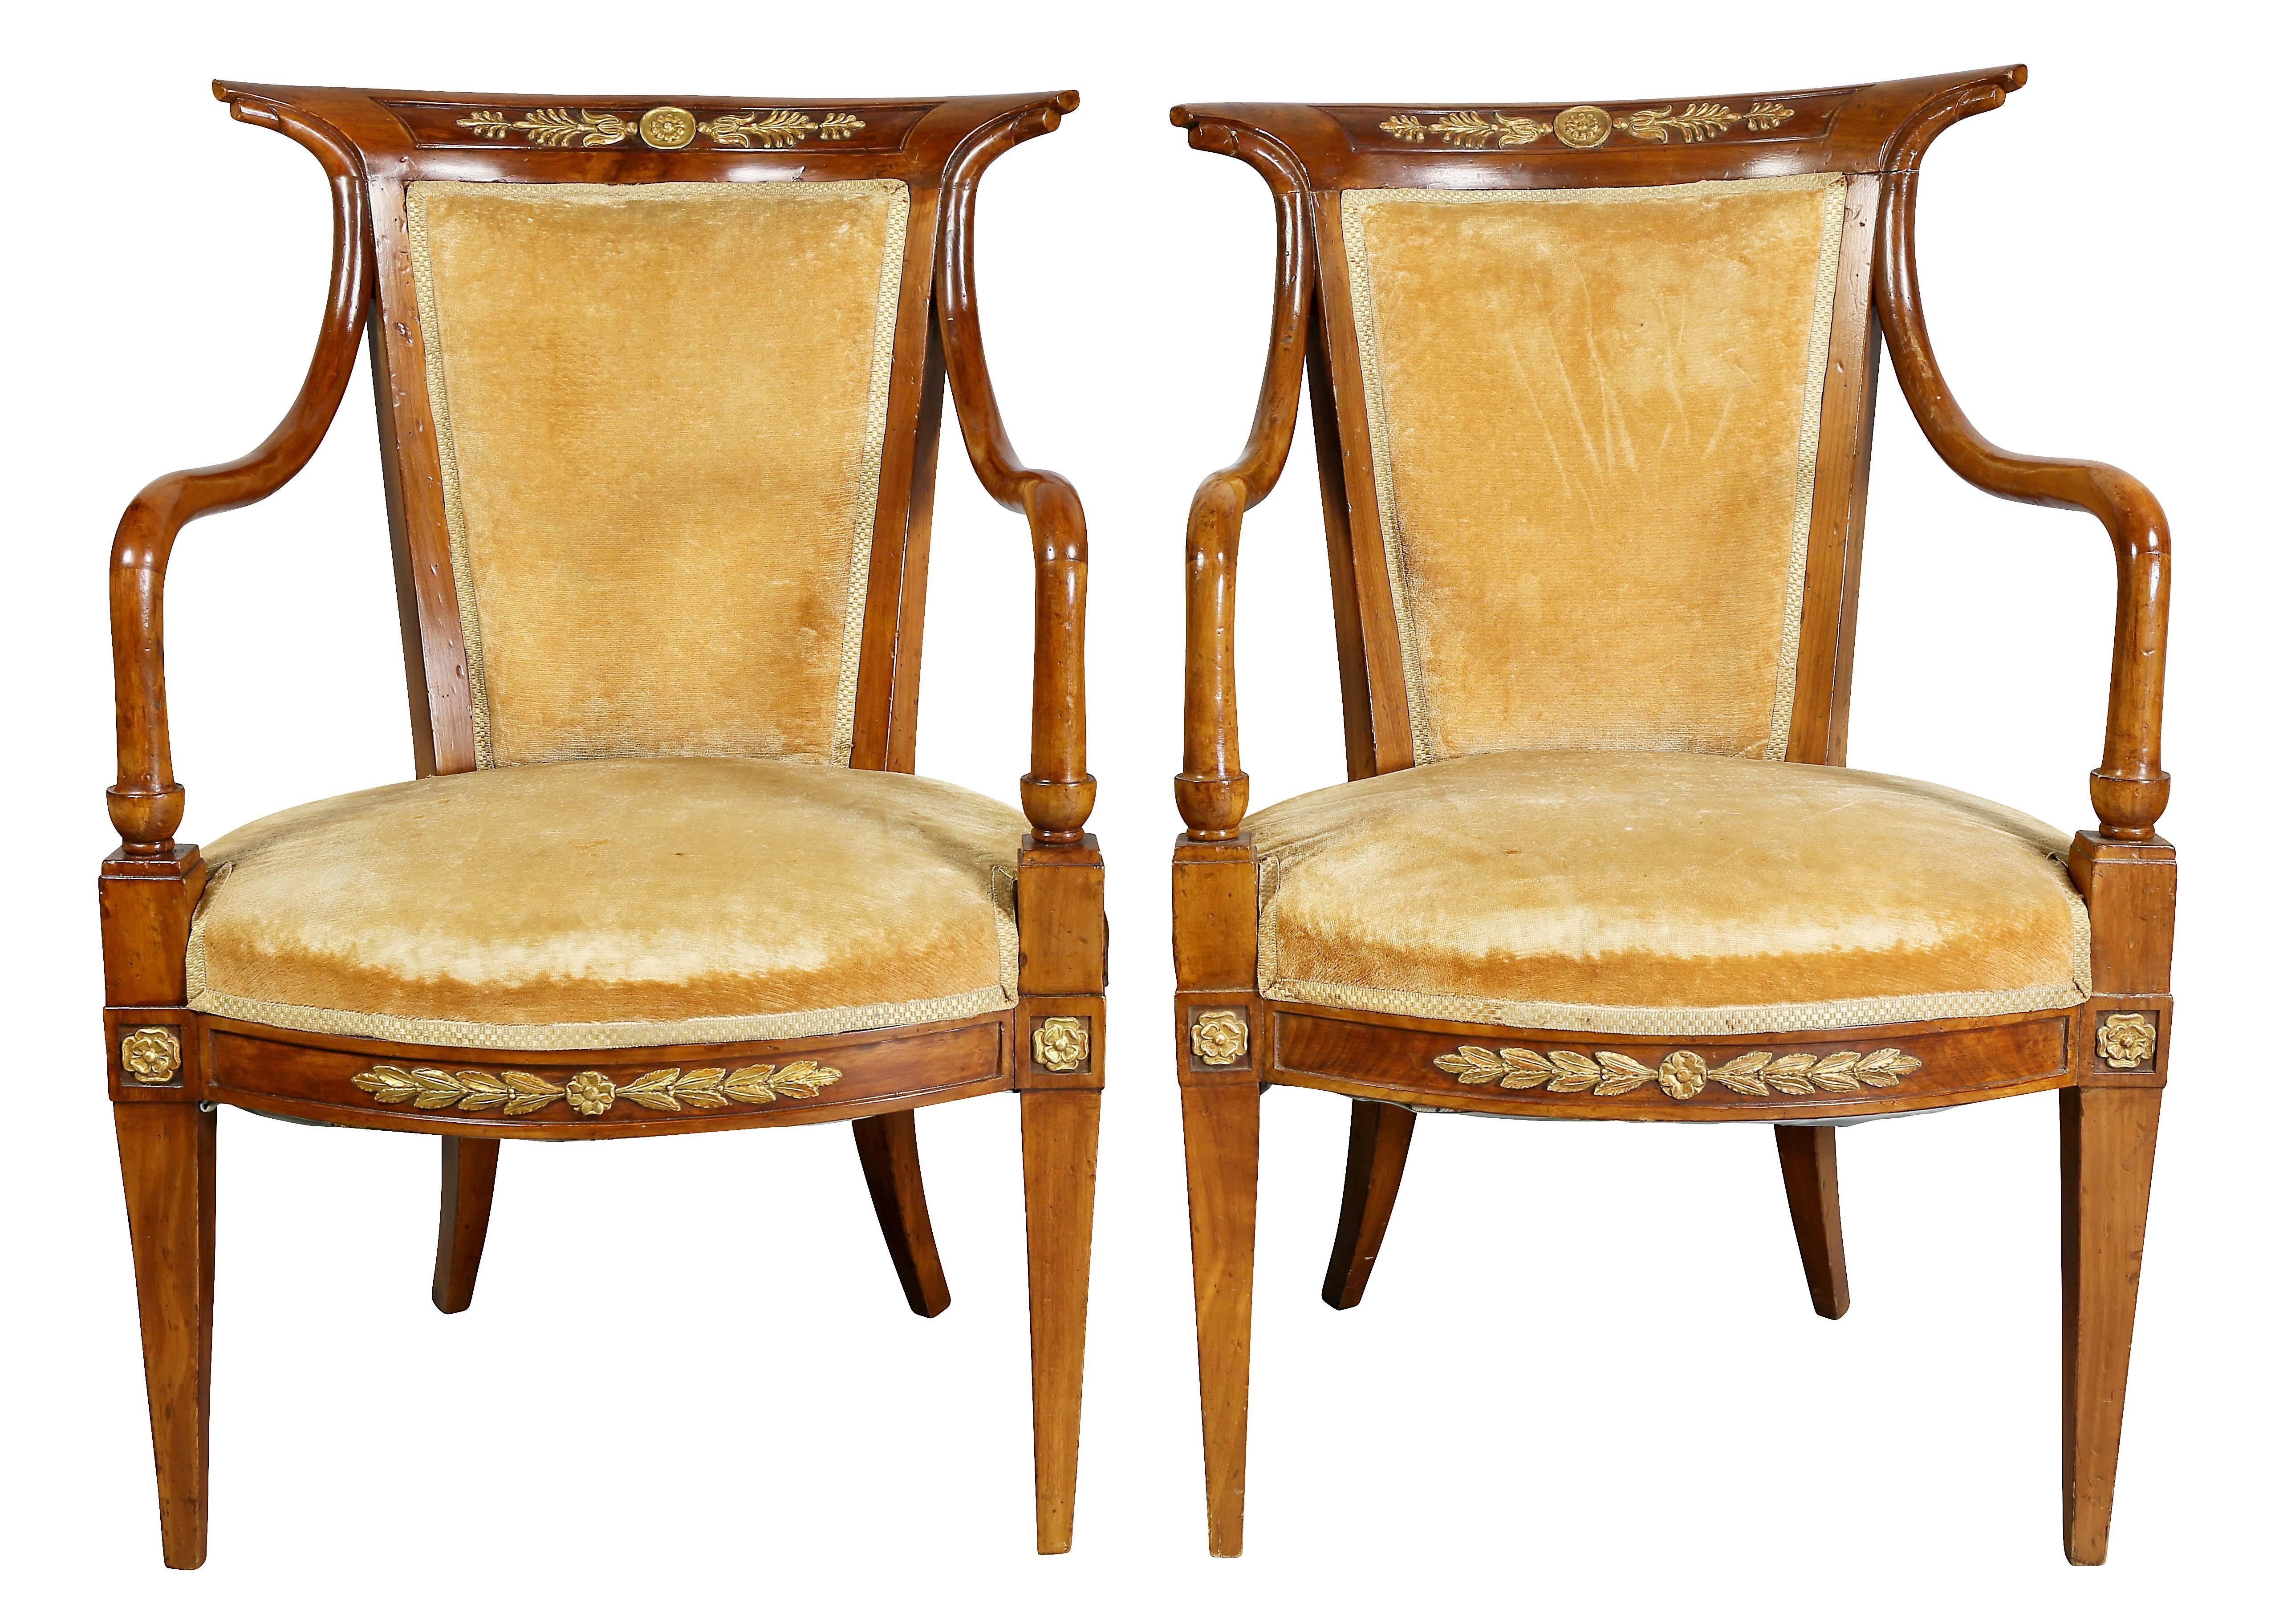 Each with panelled crestrail with central gilded anthemion and paterae, downswept arms, raised on slightly flared tapered legs with paterae, seatrail with carved details. Upholstered in gold velvet.